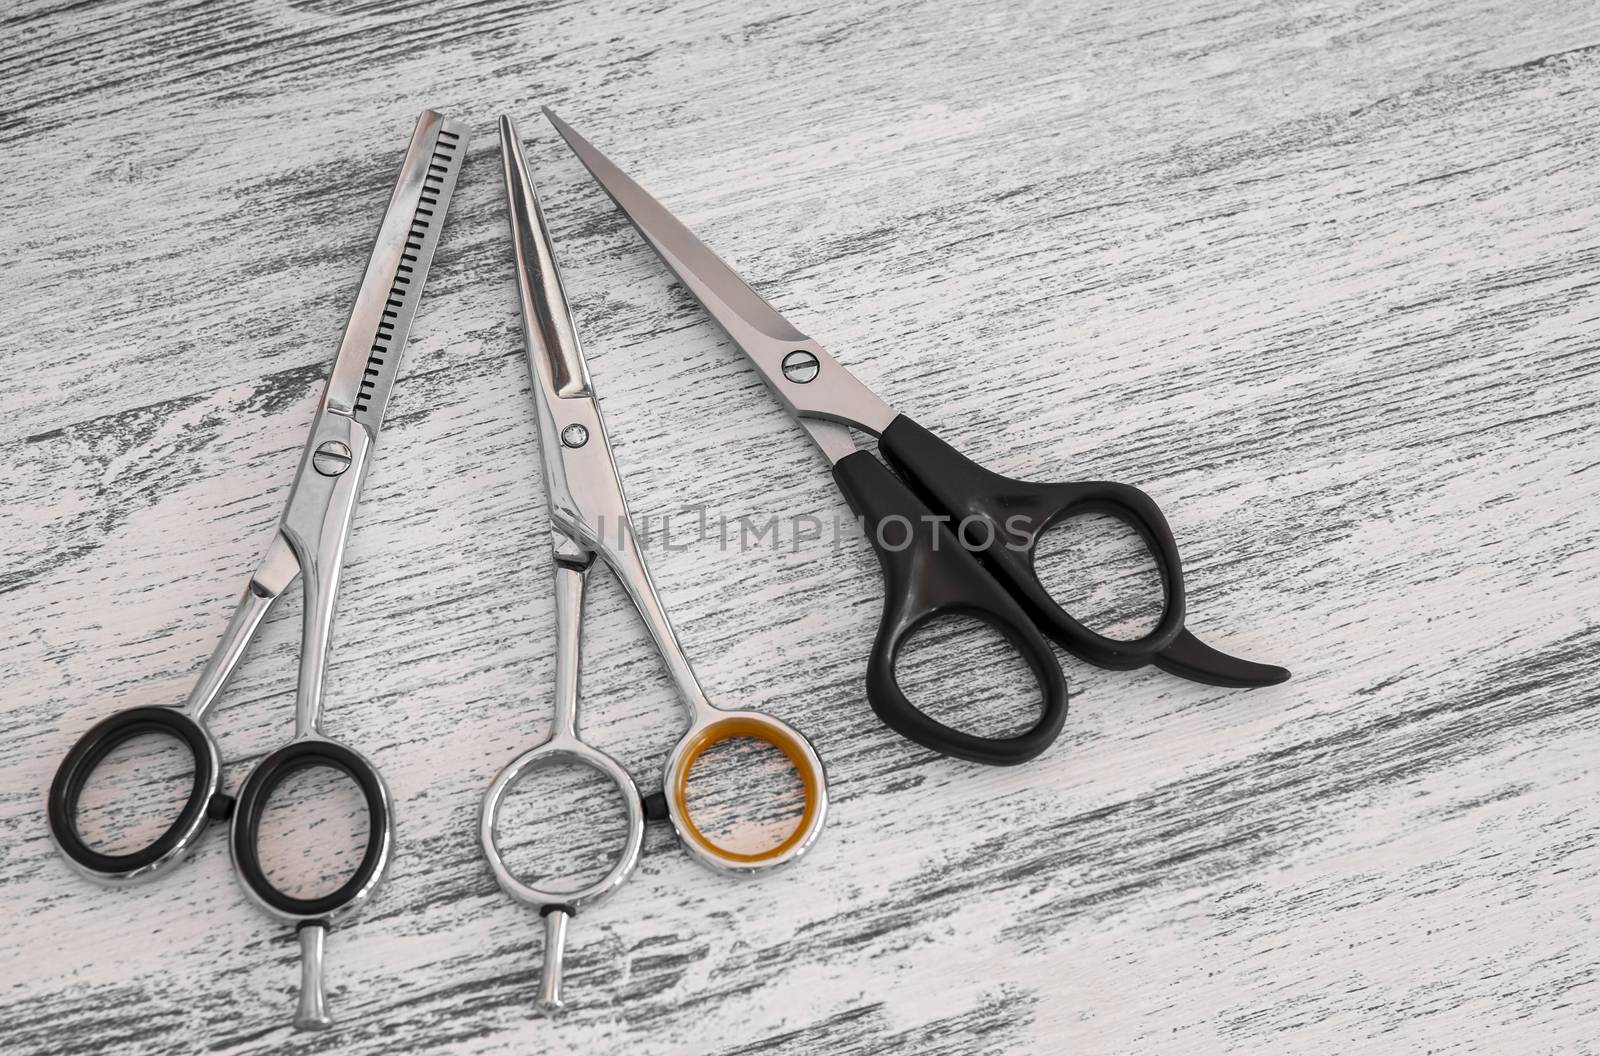 hair cutting scissors for hairdressers in beauty salon on wooden by Roberto